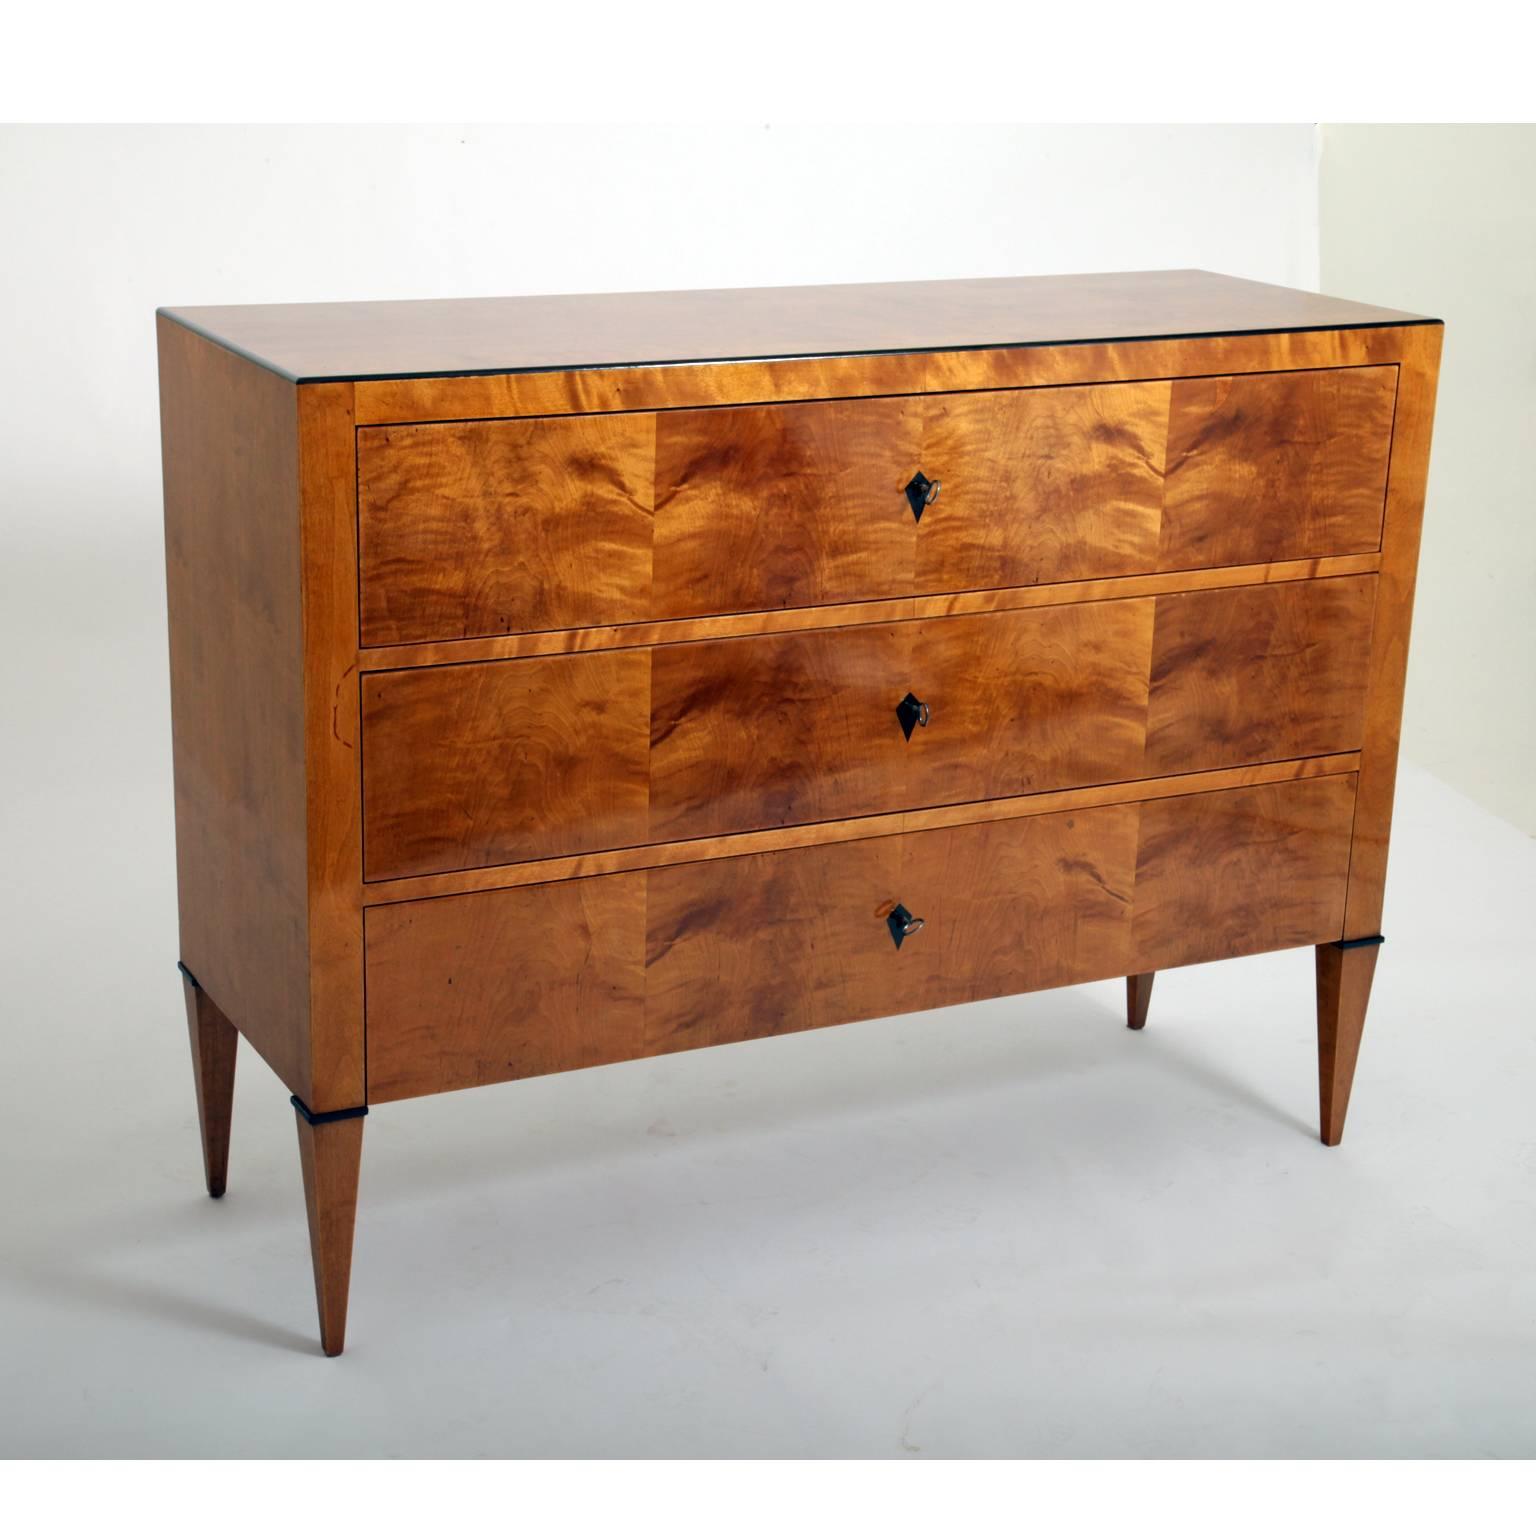 Biedermeier-style chest of drawers on tapered feet with ebonized details and rhomboid escutcheons. Smooth body with a black accentuated edge and a very beautiful birchwood veneer.